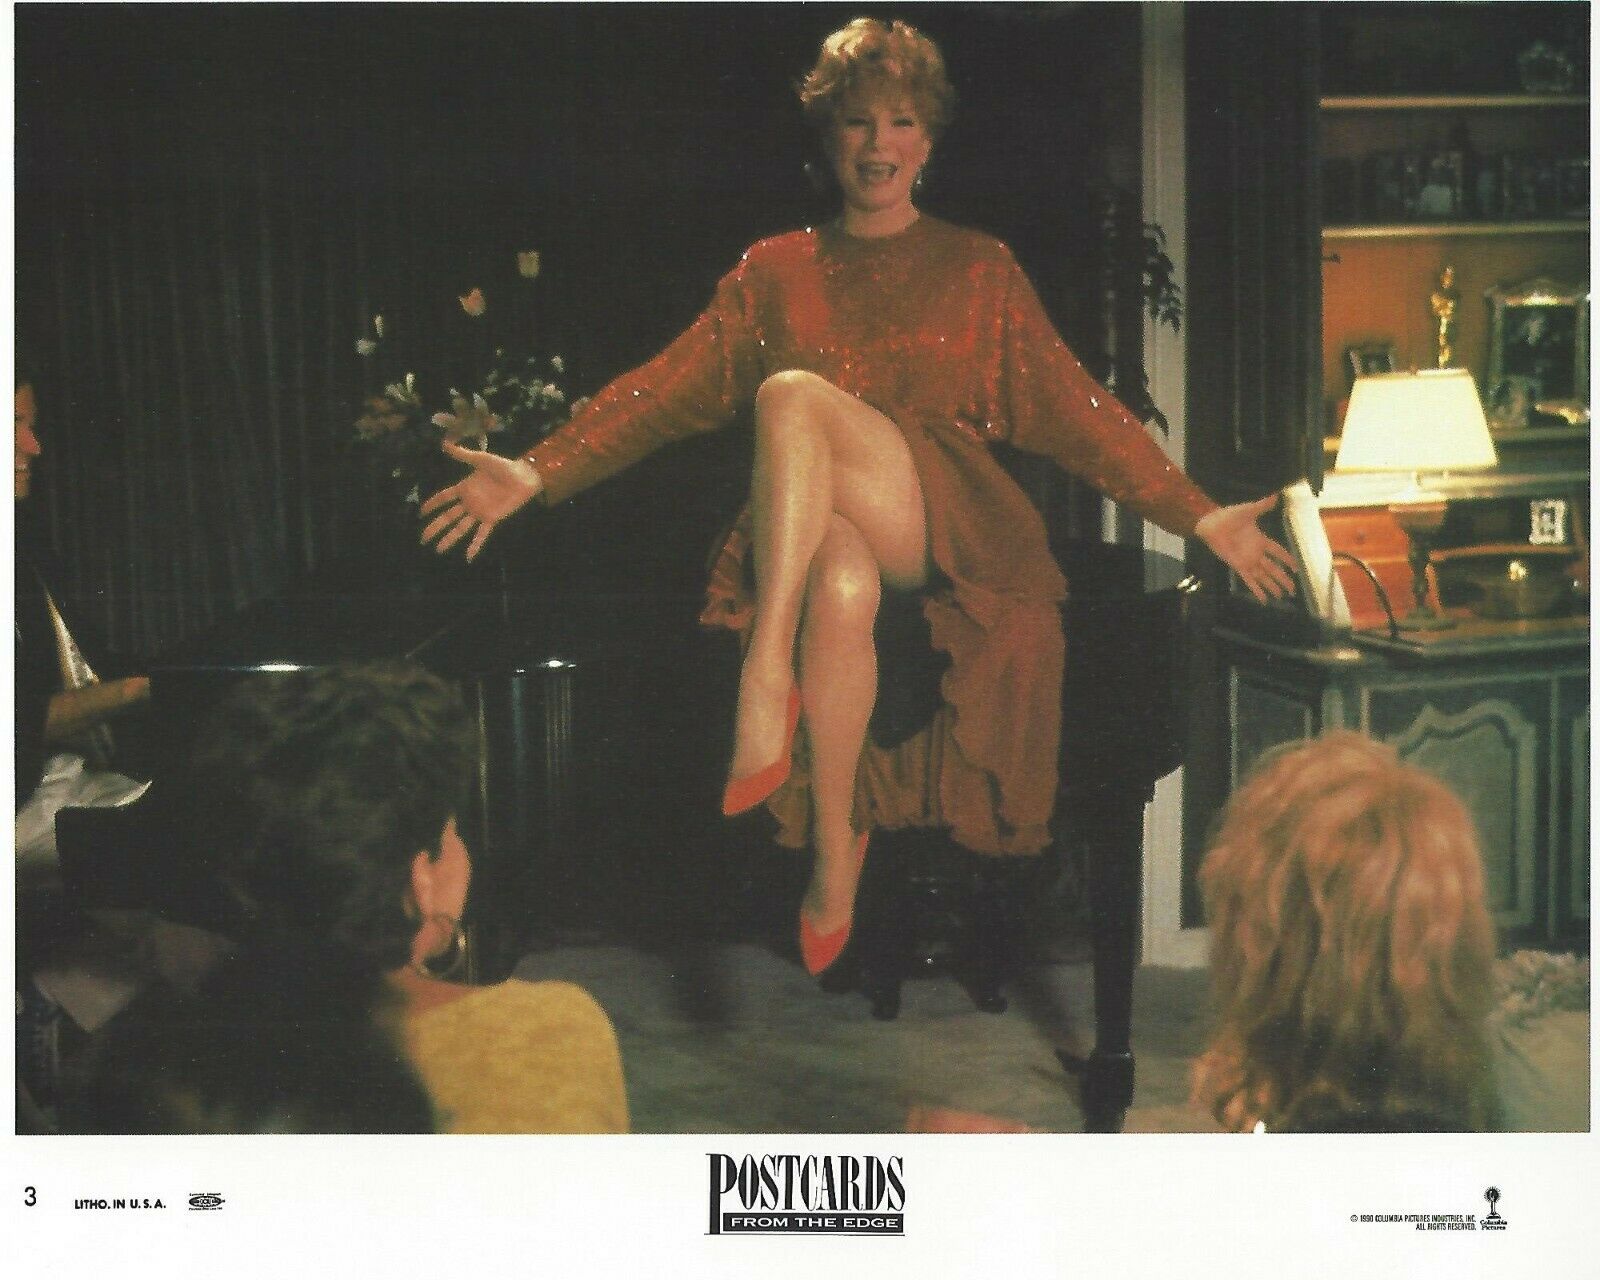 Post Cards From The Edge Original 8x10 Lobby Card Poster 1990 Photo #3 Maclaine